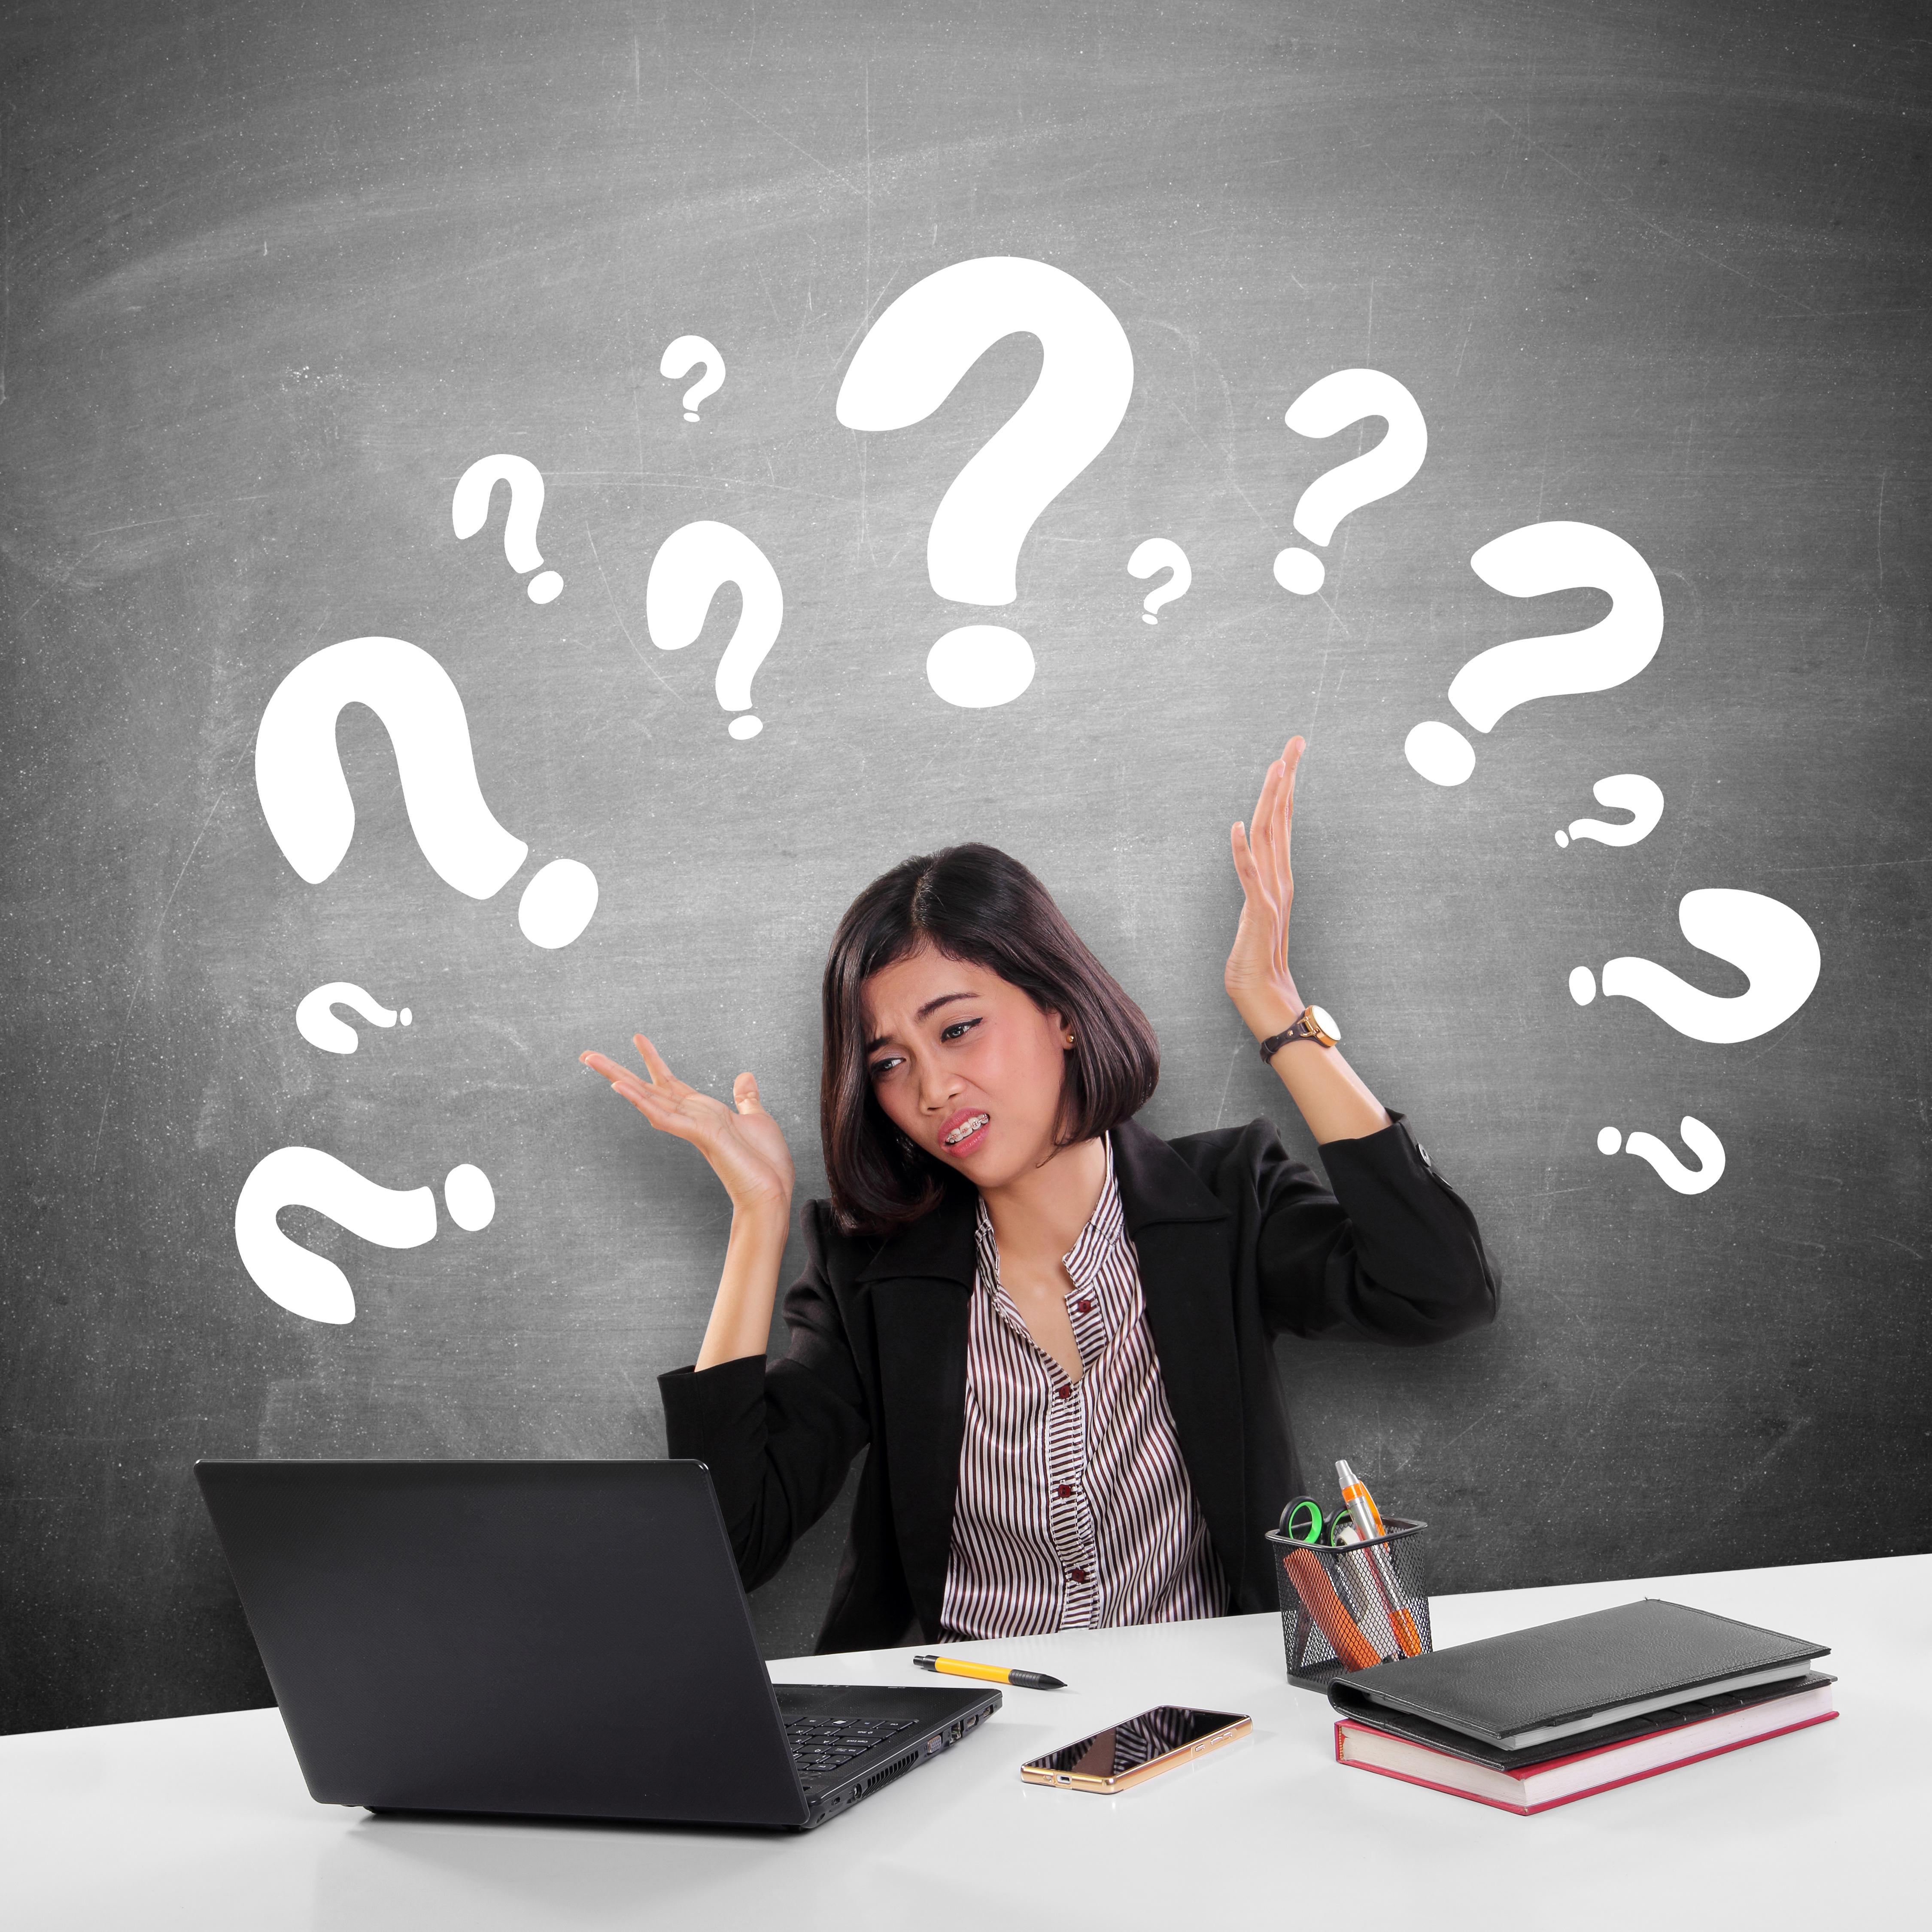 Conceptual image of a female office worker gets confused while doing her job, illustrated with many question marks above her head